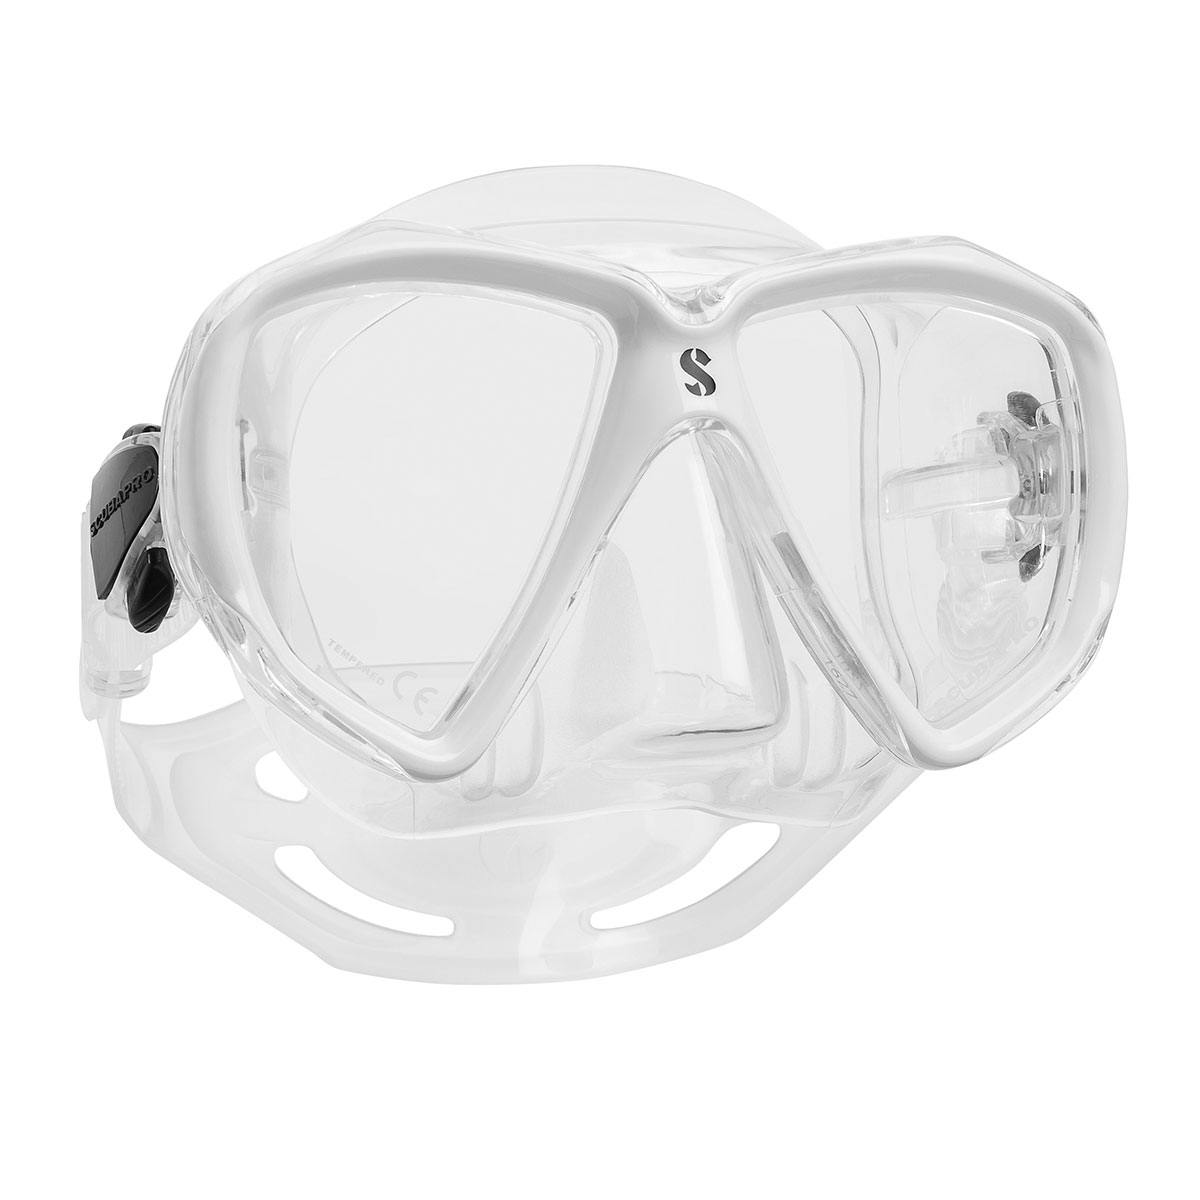 ScubaPro Spectra Mask, Two Lens - Clear/White